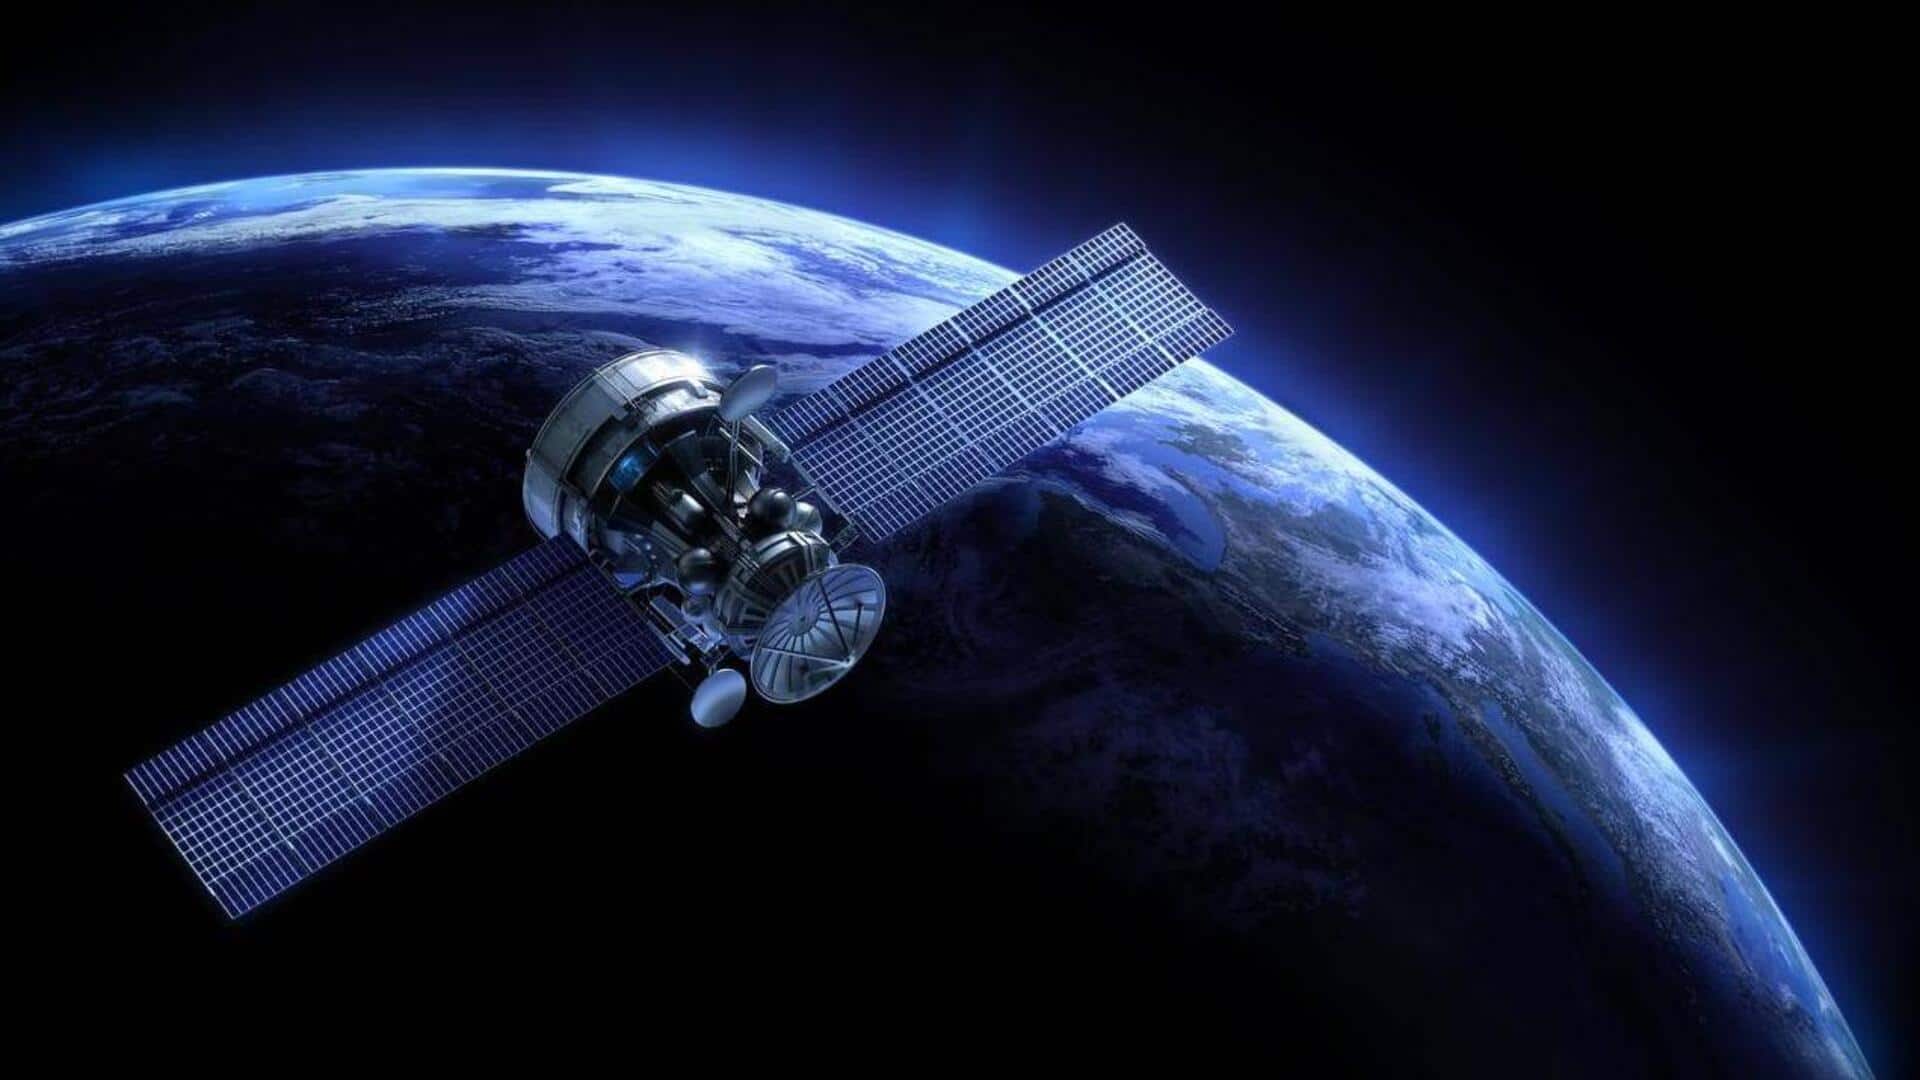 Starlink-rival OneWeb India gets approval for satellite broadband services